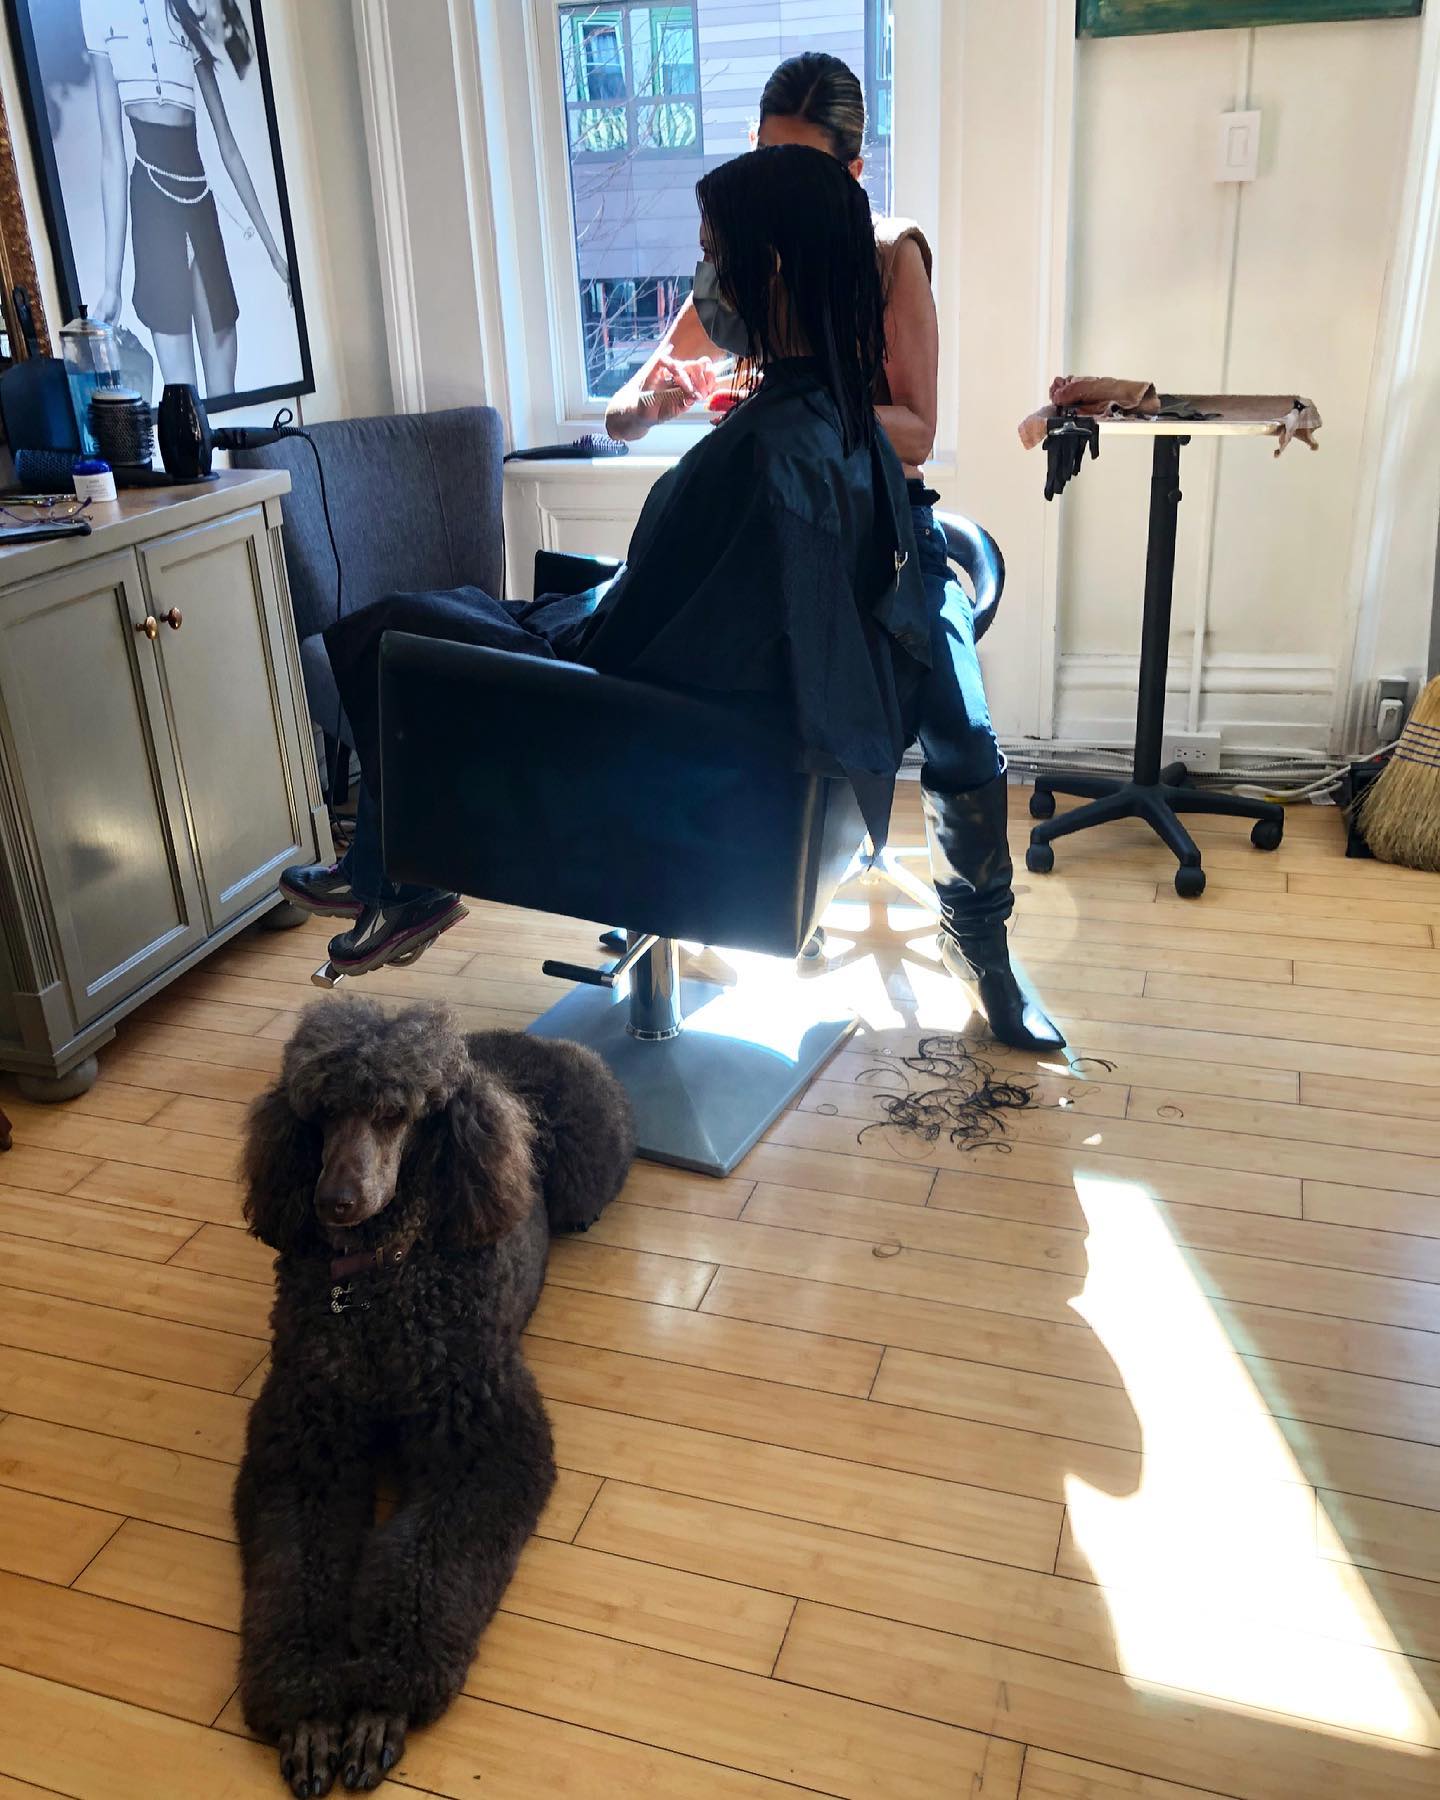 Someone came to visit Julie Stone Salon today